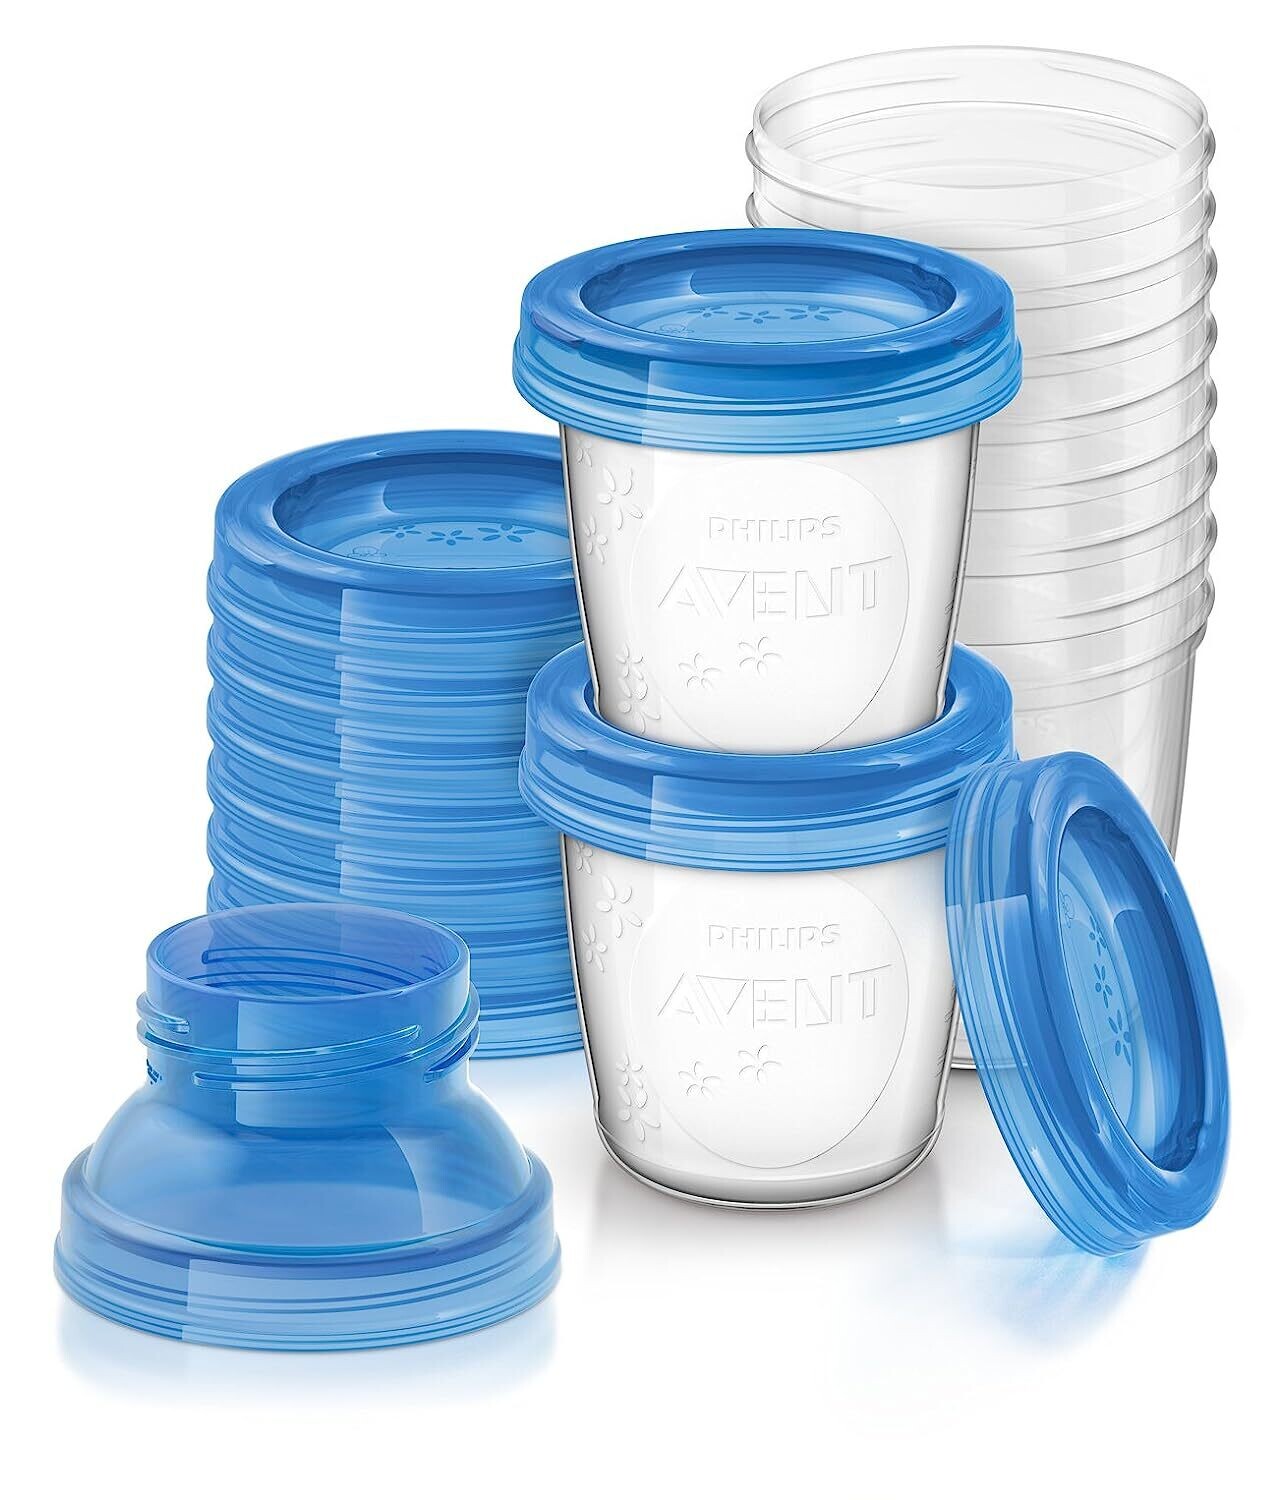 Philips AVENT Breast Milk Storage Cups And Lids, 10 6oz (180ml) Containers, SCF618/10 - 10pcs Pack